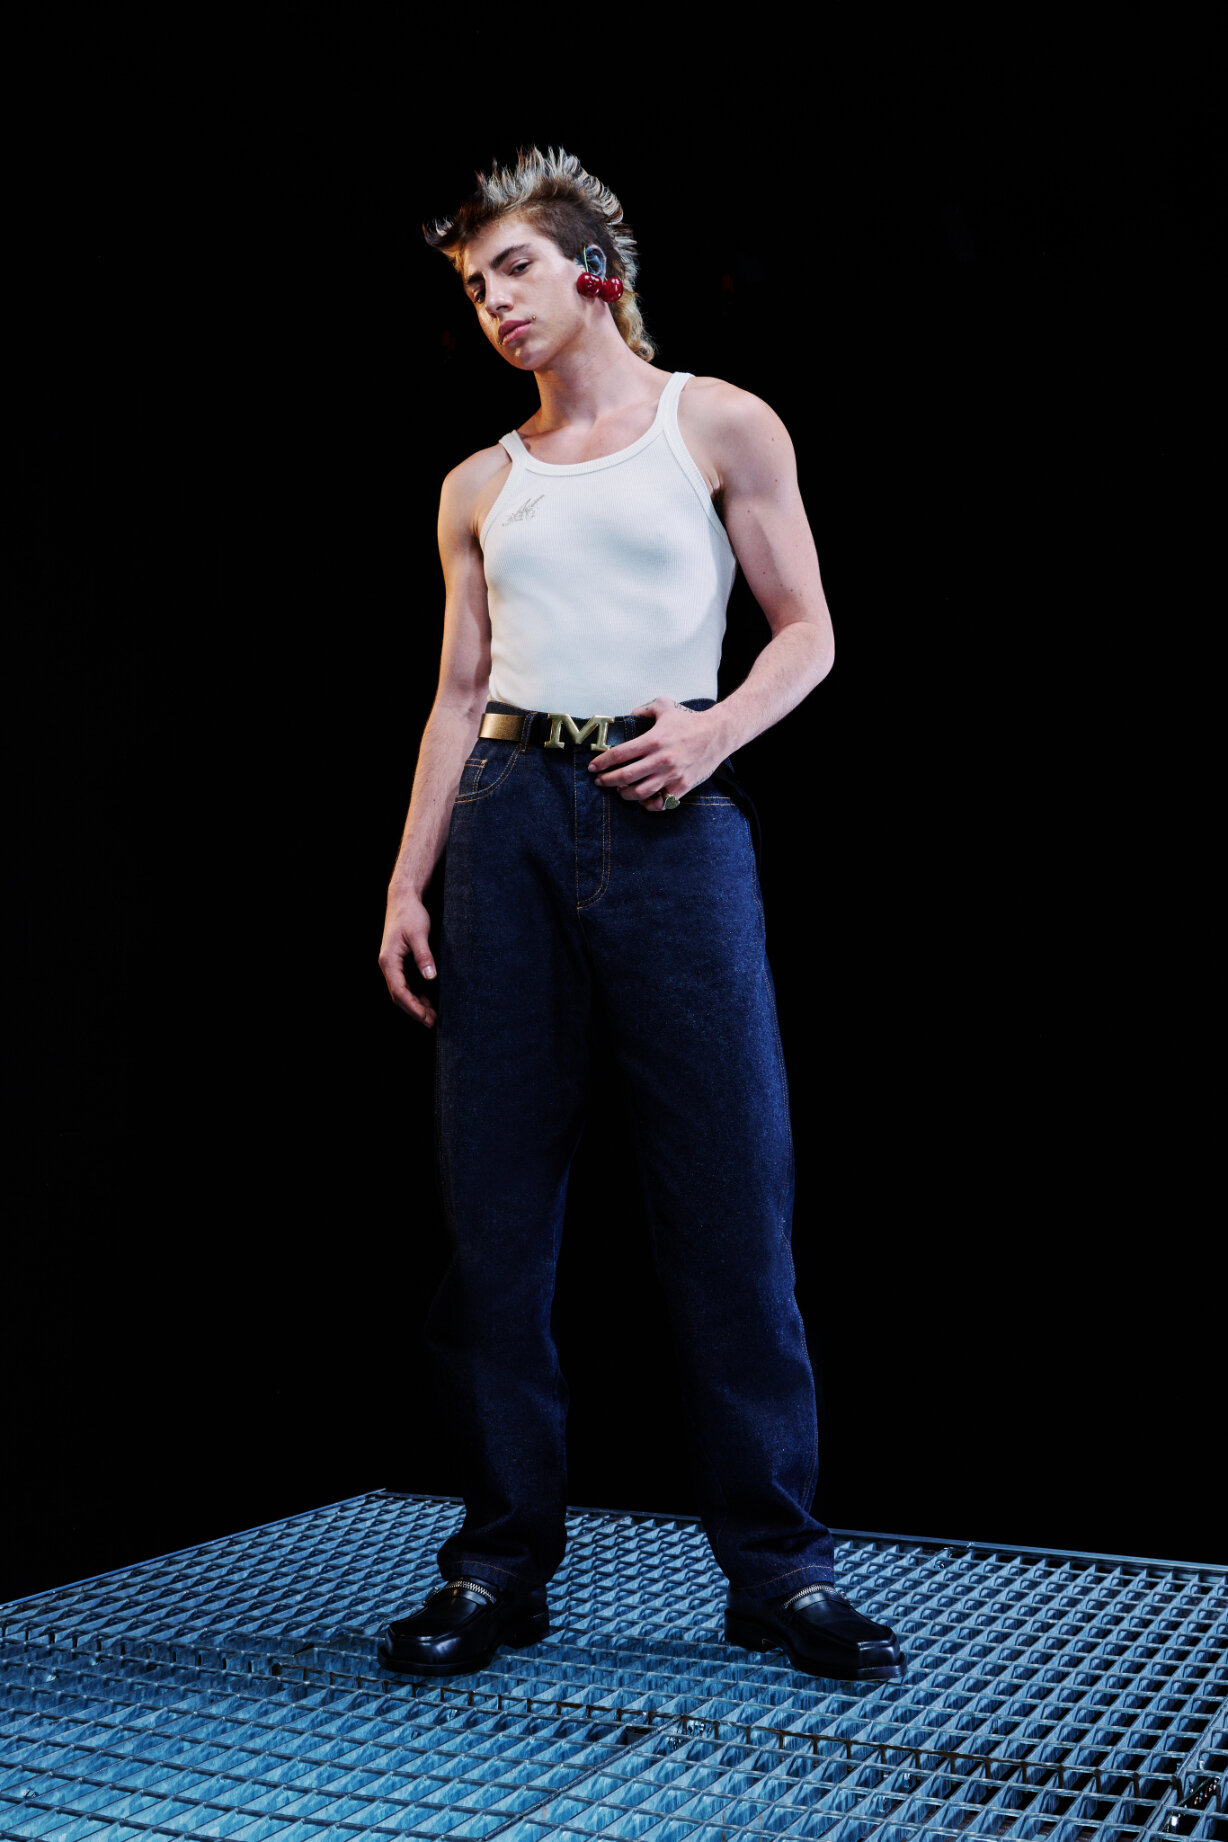  Model wears white tank top and jeans for Magliano's Spring/Summer 2022 collection for Milan Fashion Week. 